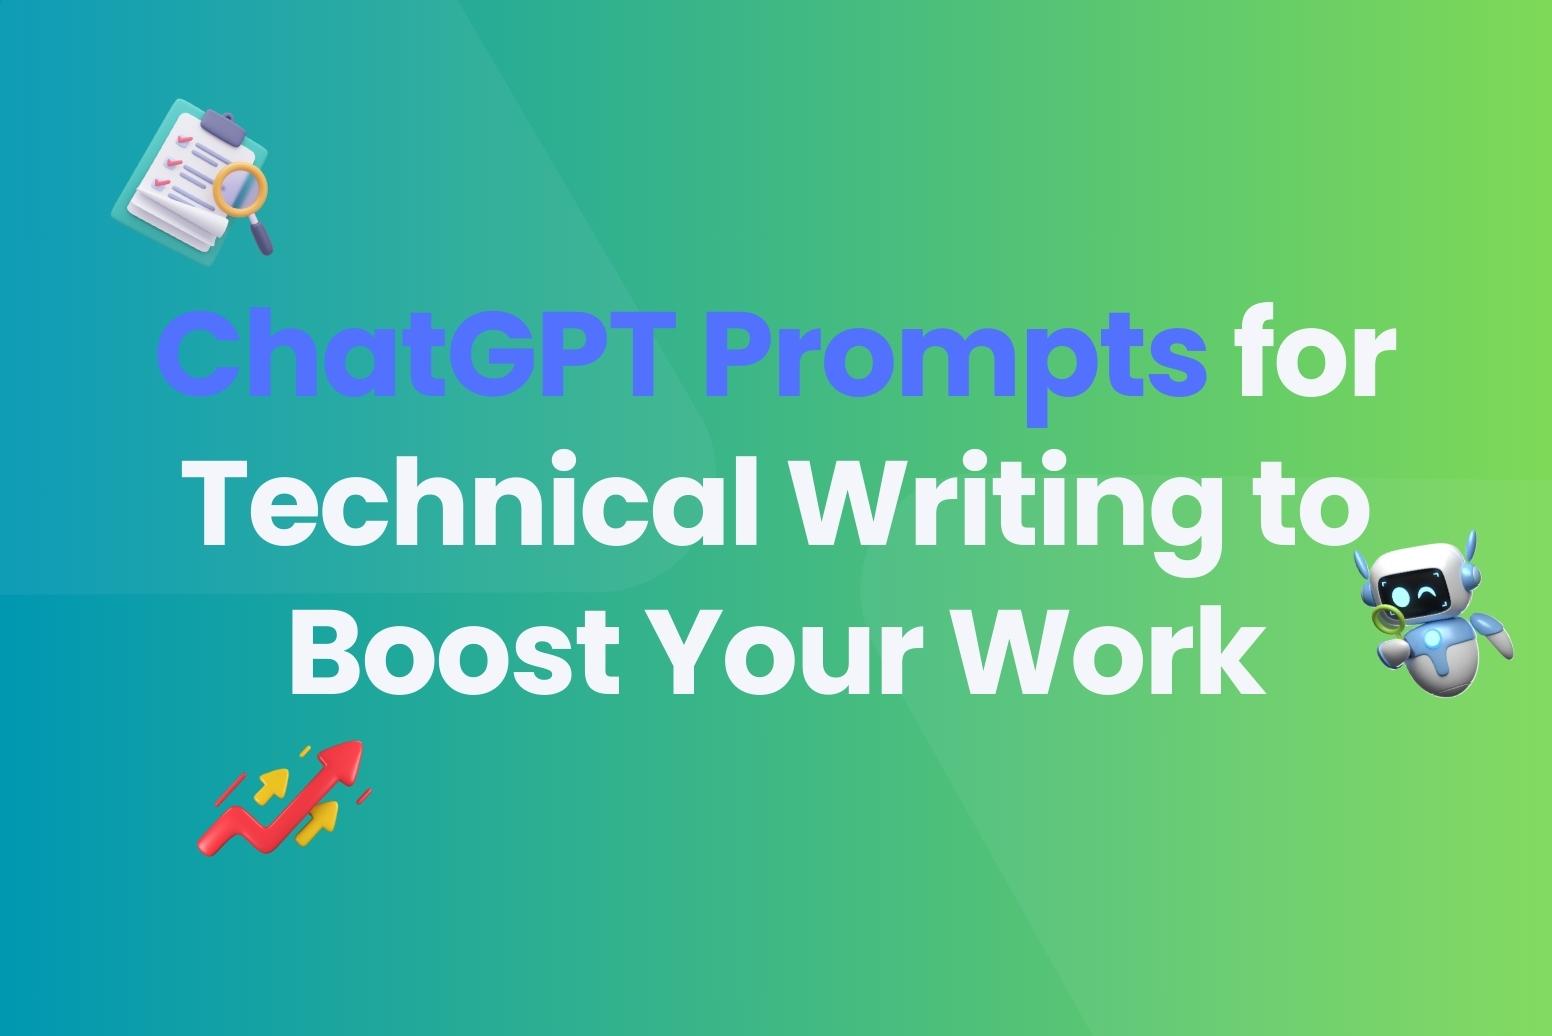 chatgpt prompts for technical writing